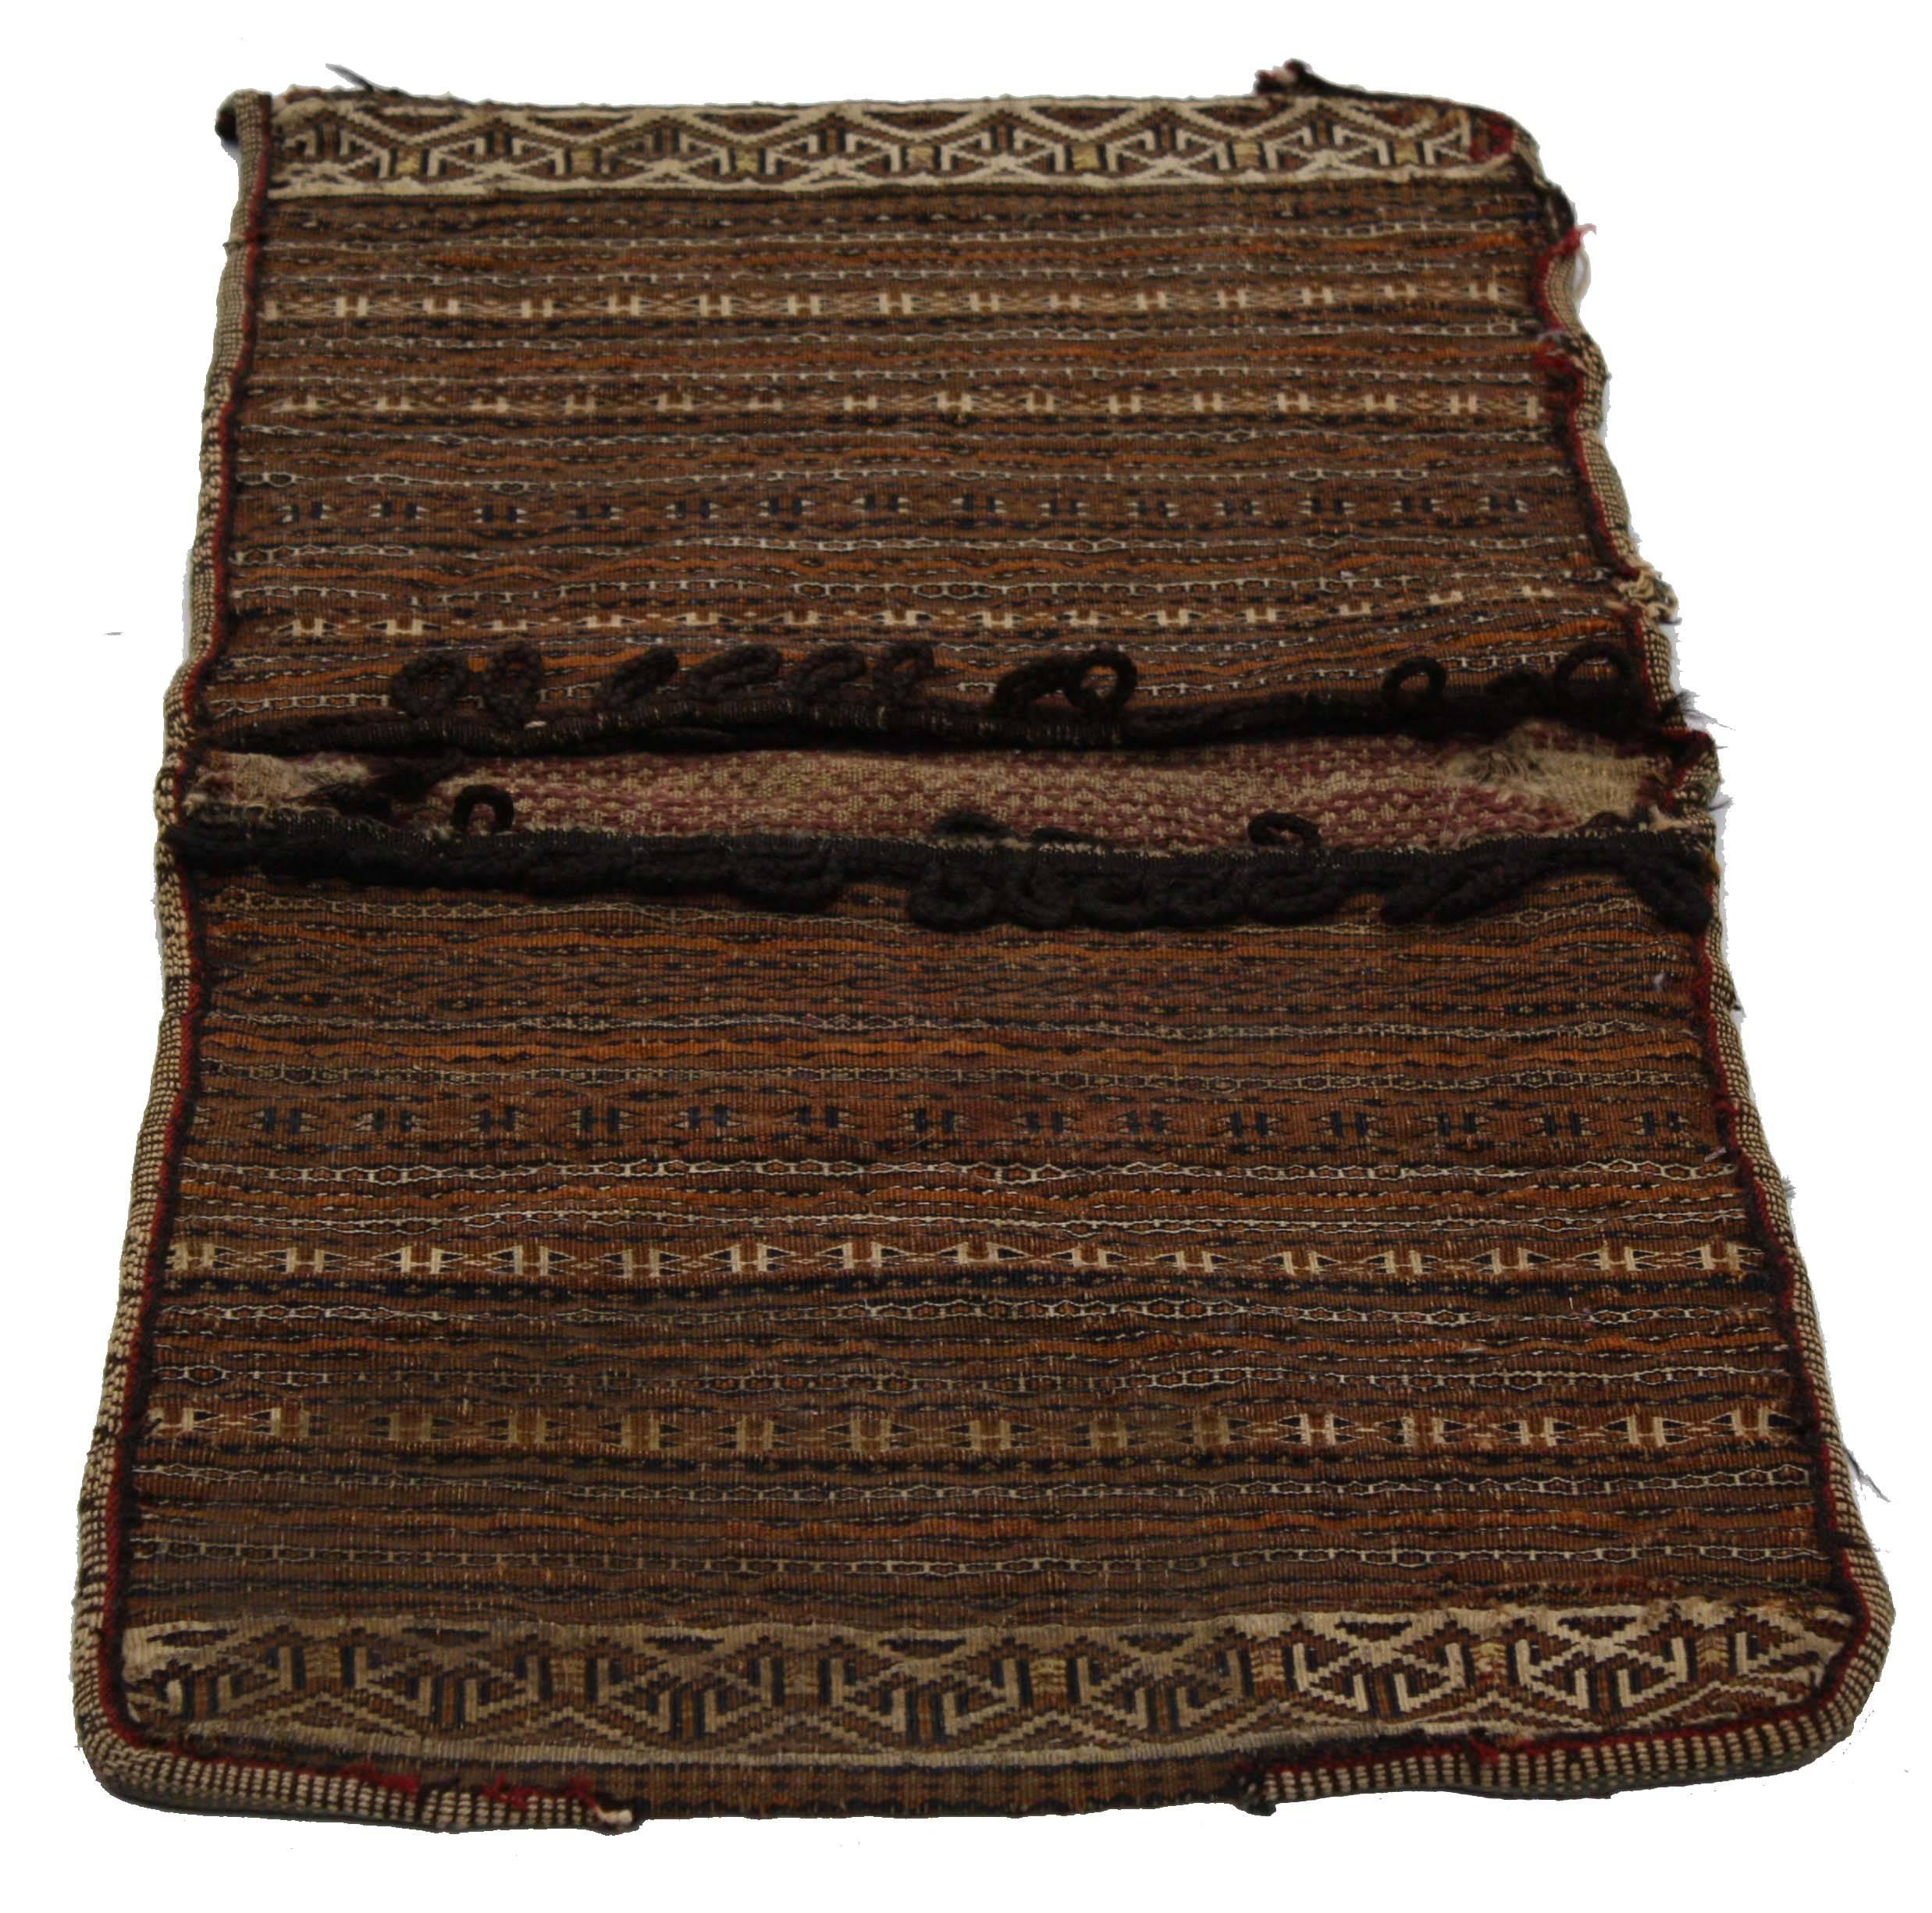 Hand-Knotted Antique Baluch Bagface, Saddlebag, Afghan Rug, Textile Art, Tribal Wall Hanging For Sale